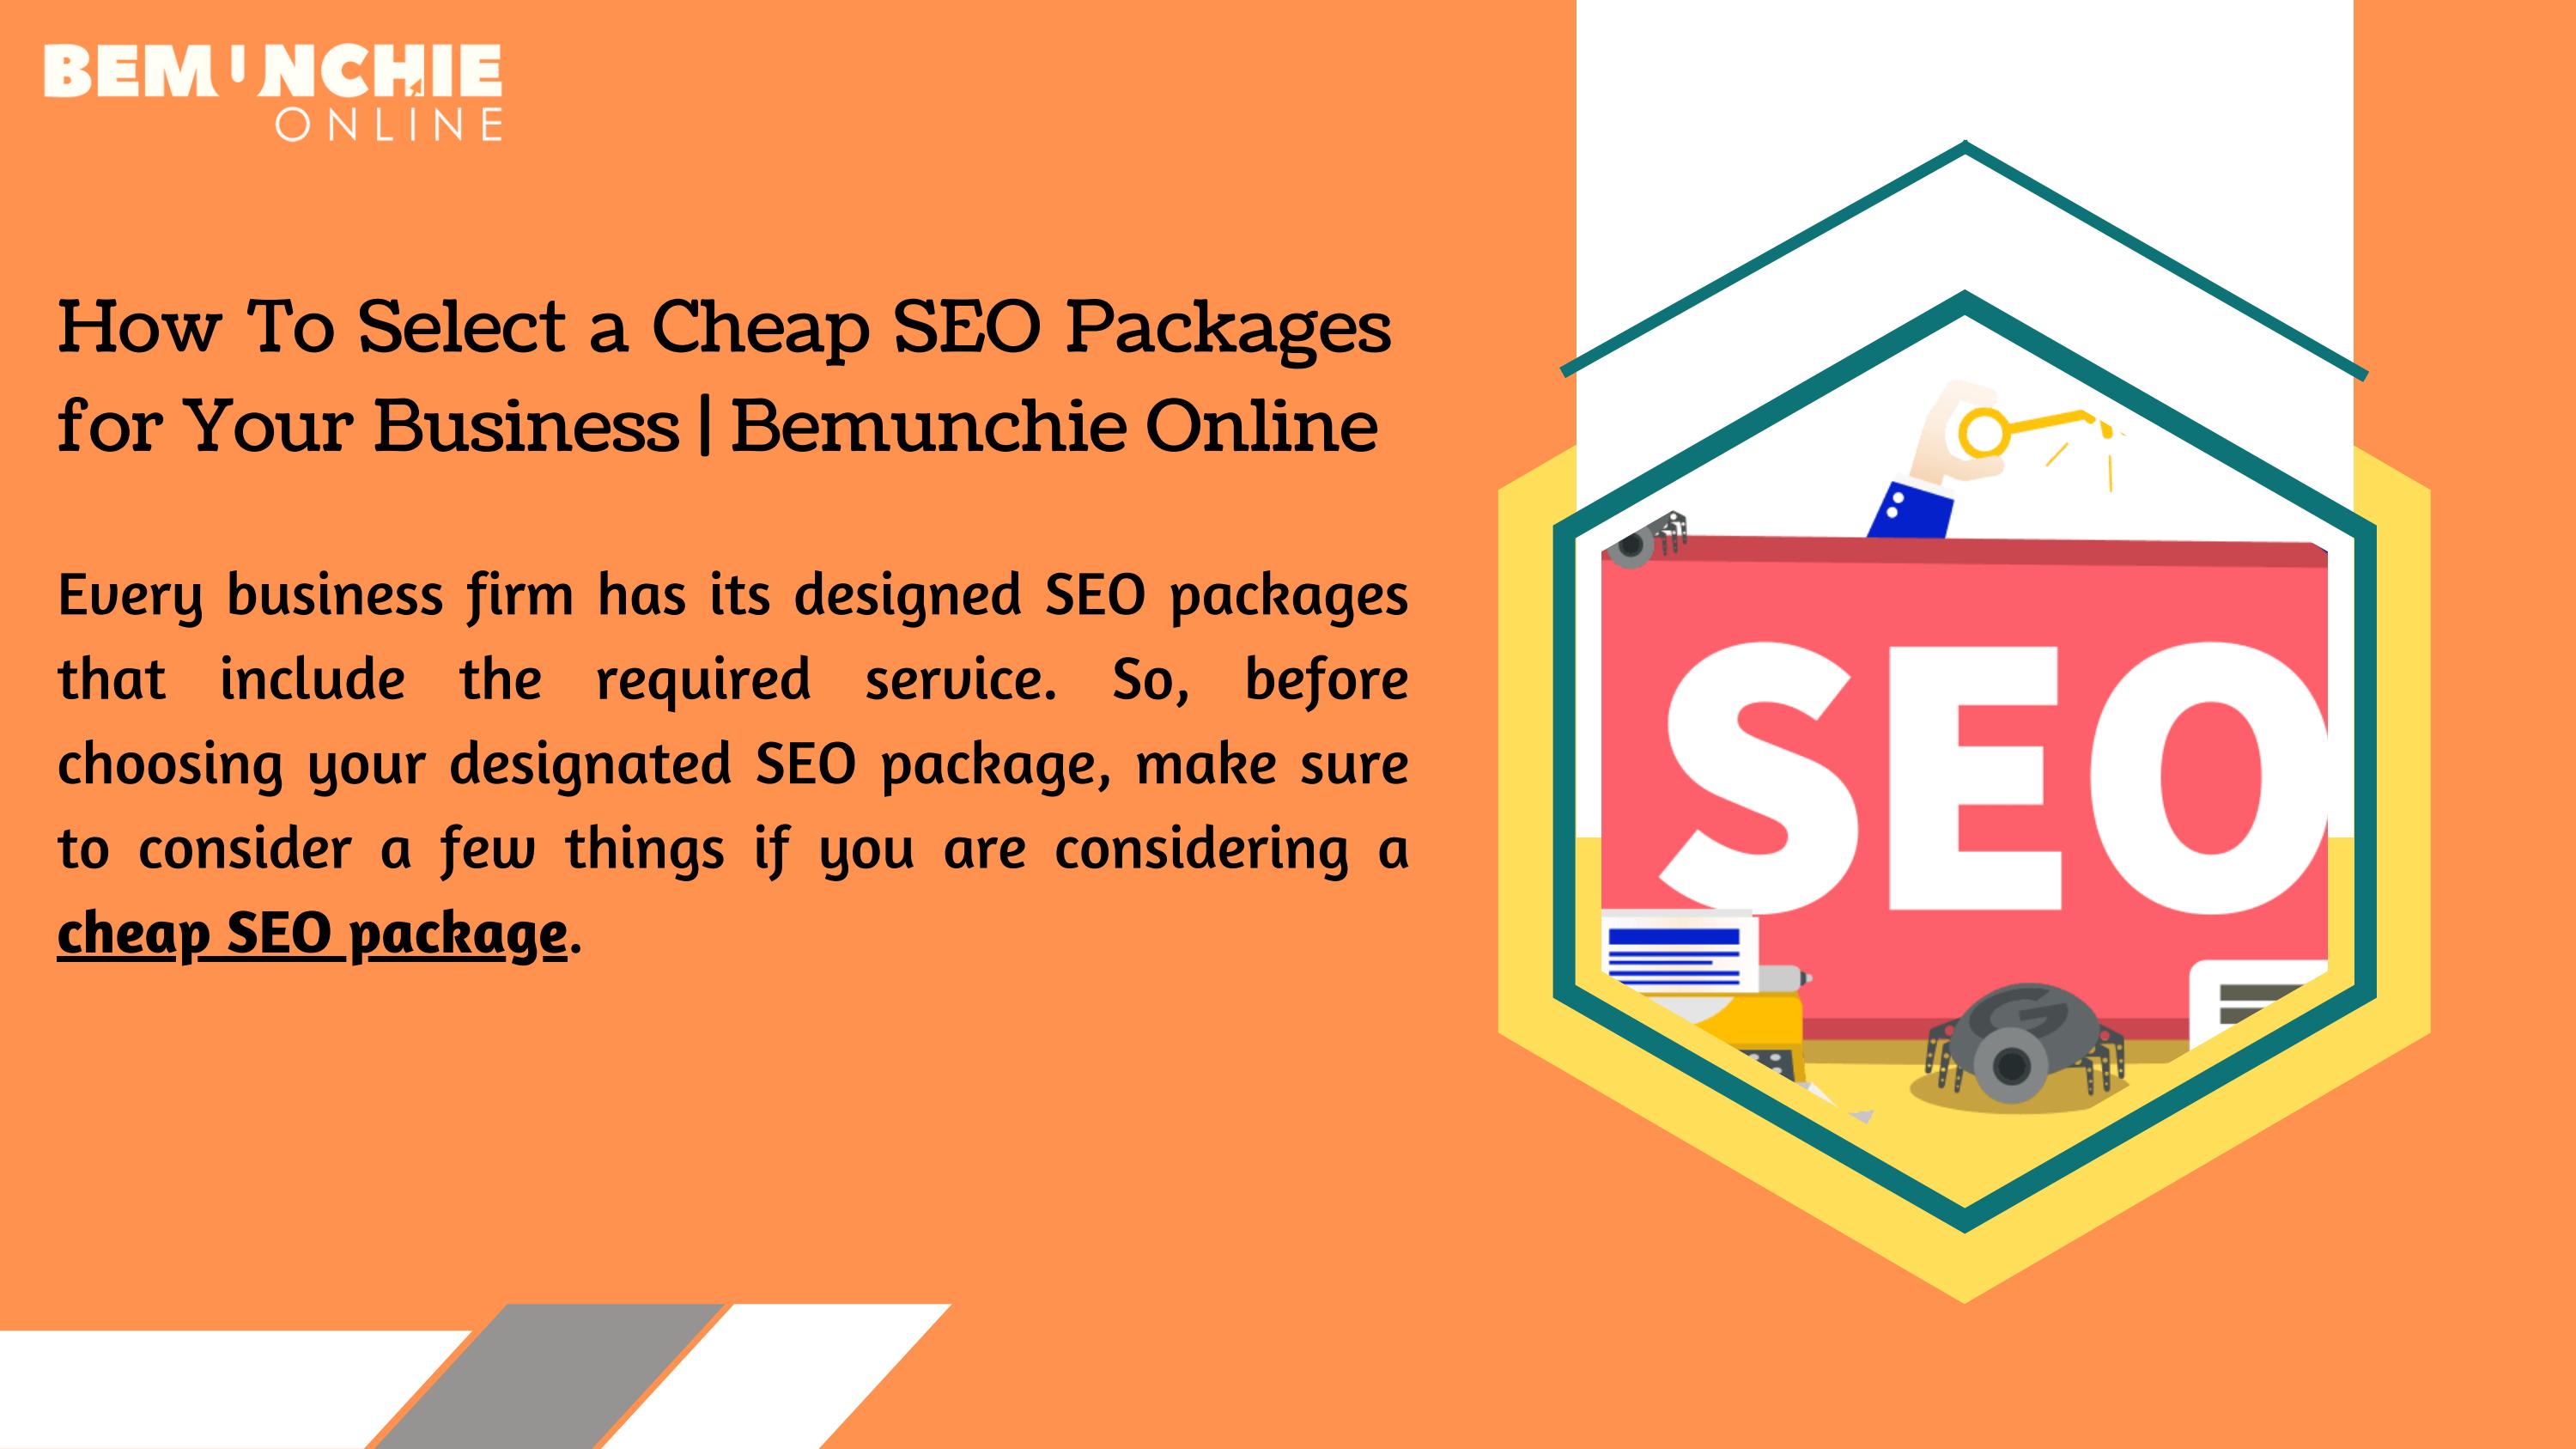 How To Select a Cheap SEO Packages for Your Business